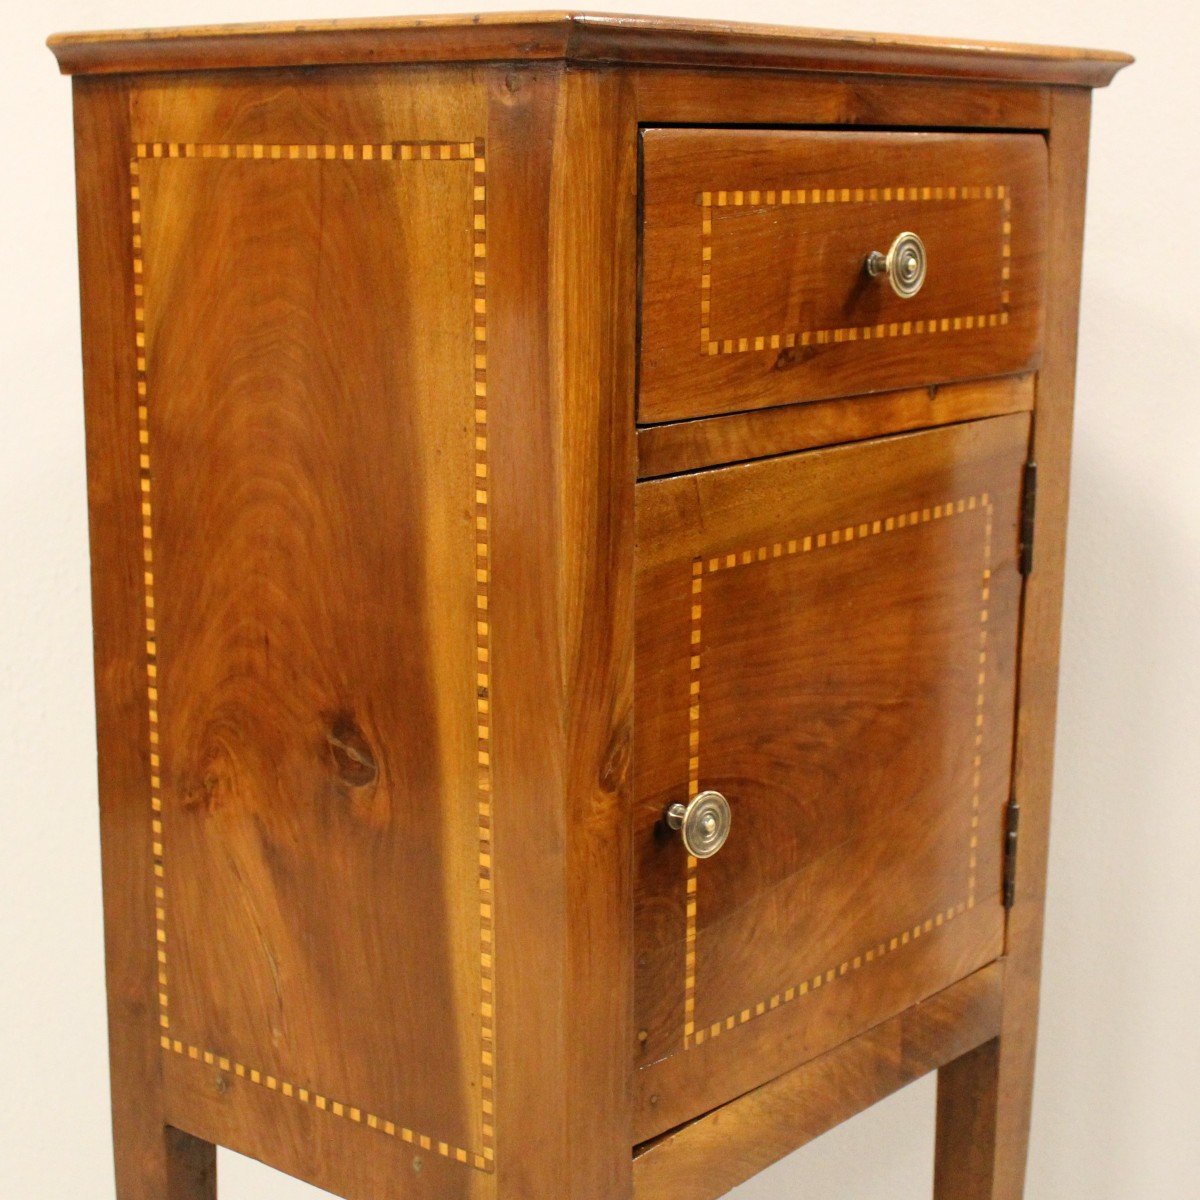 Antique Directoire Bedside Nightstand Table In Walnut And Marquetry - Italy 19th-photo-3